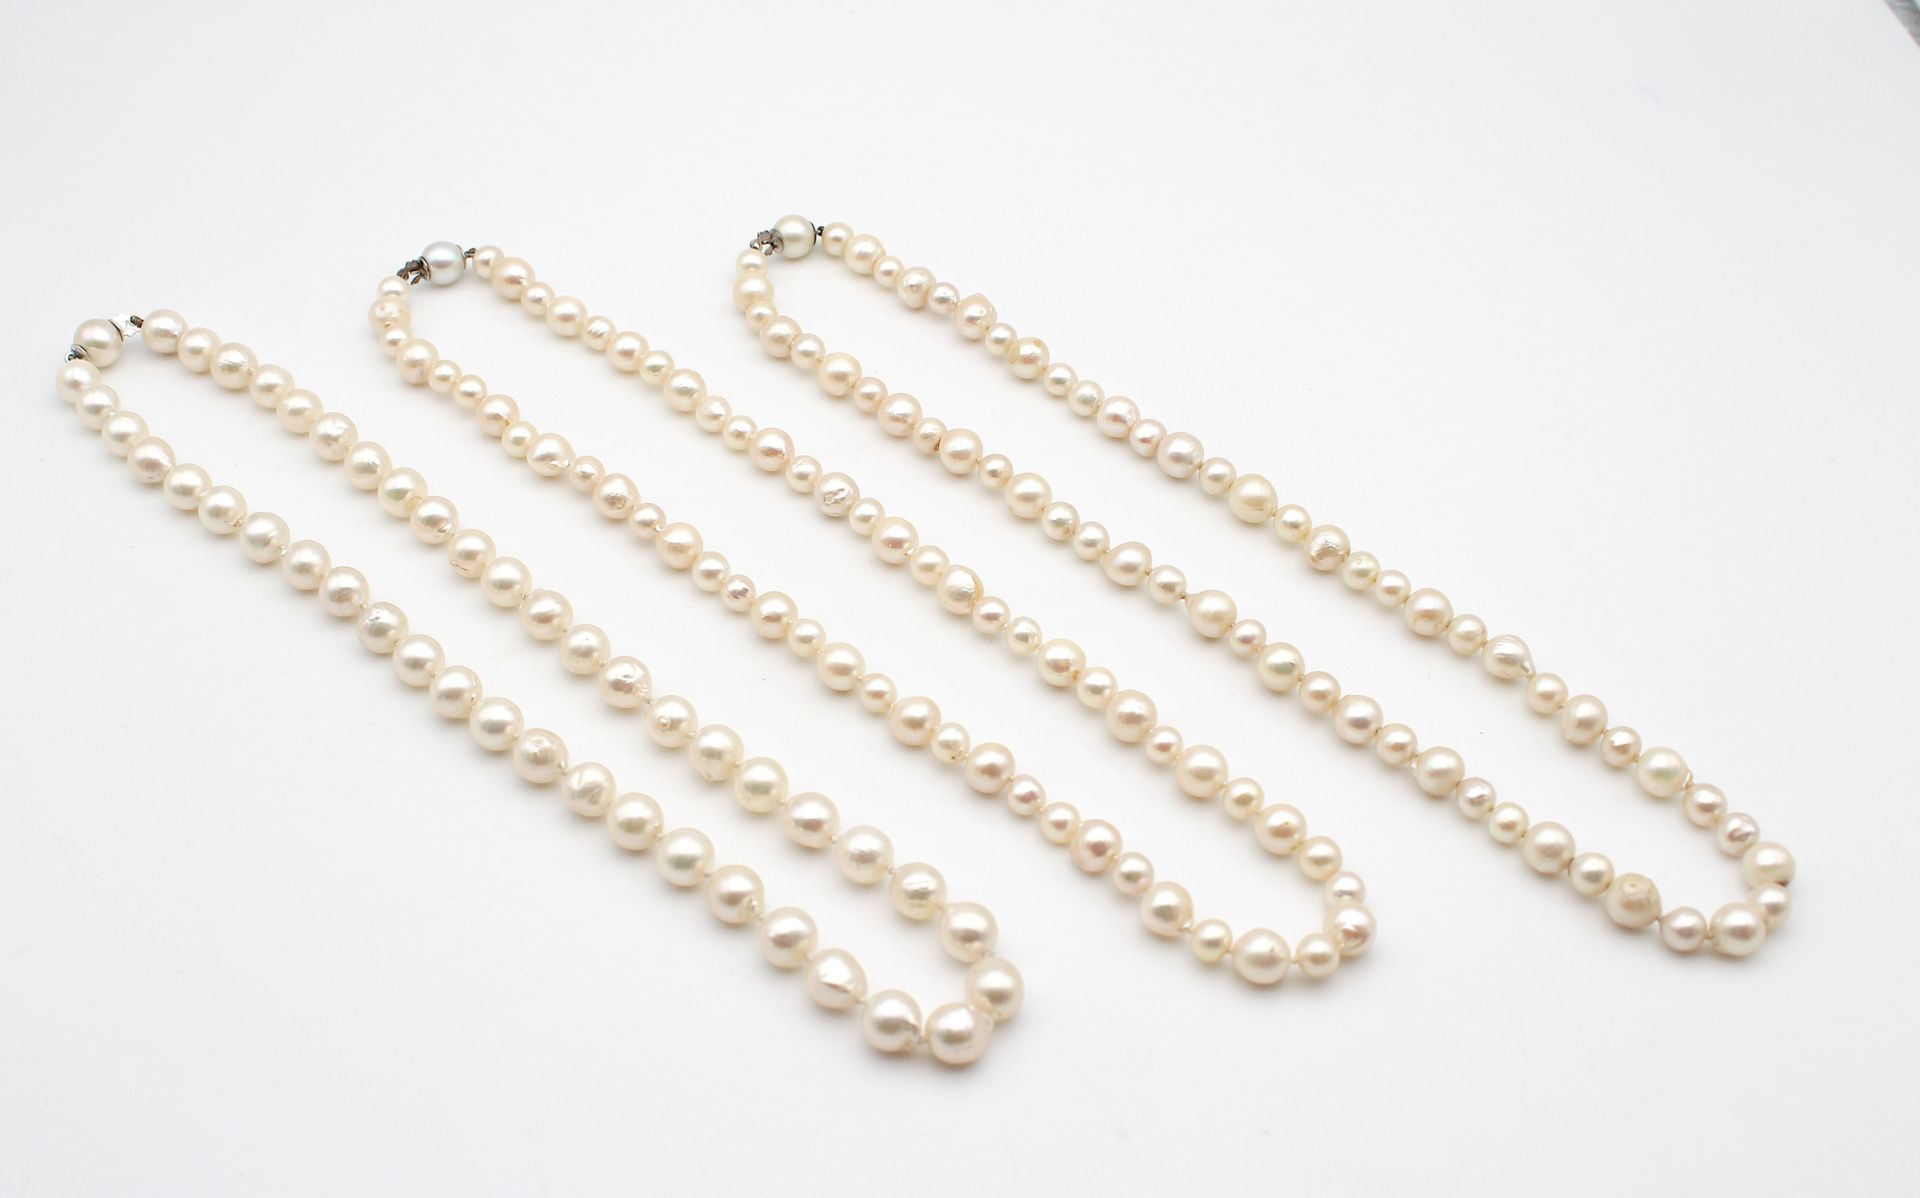 3 simple cultured pearl necklaces